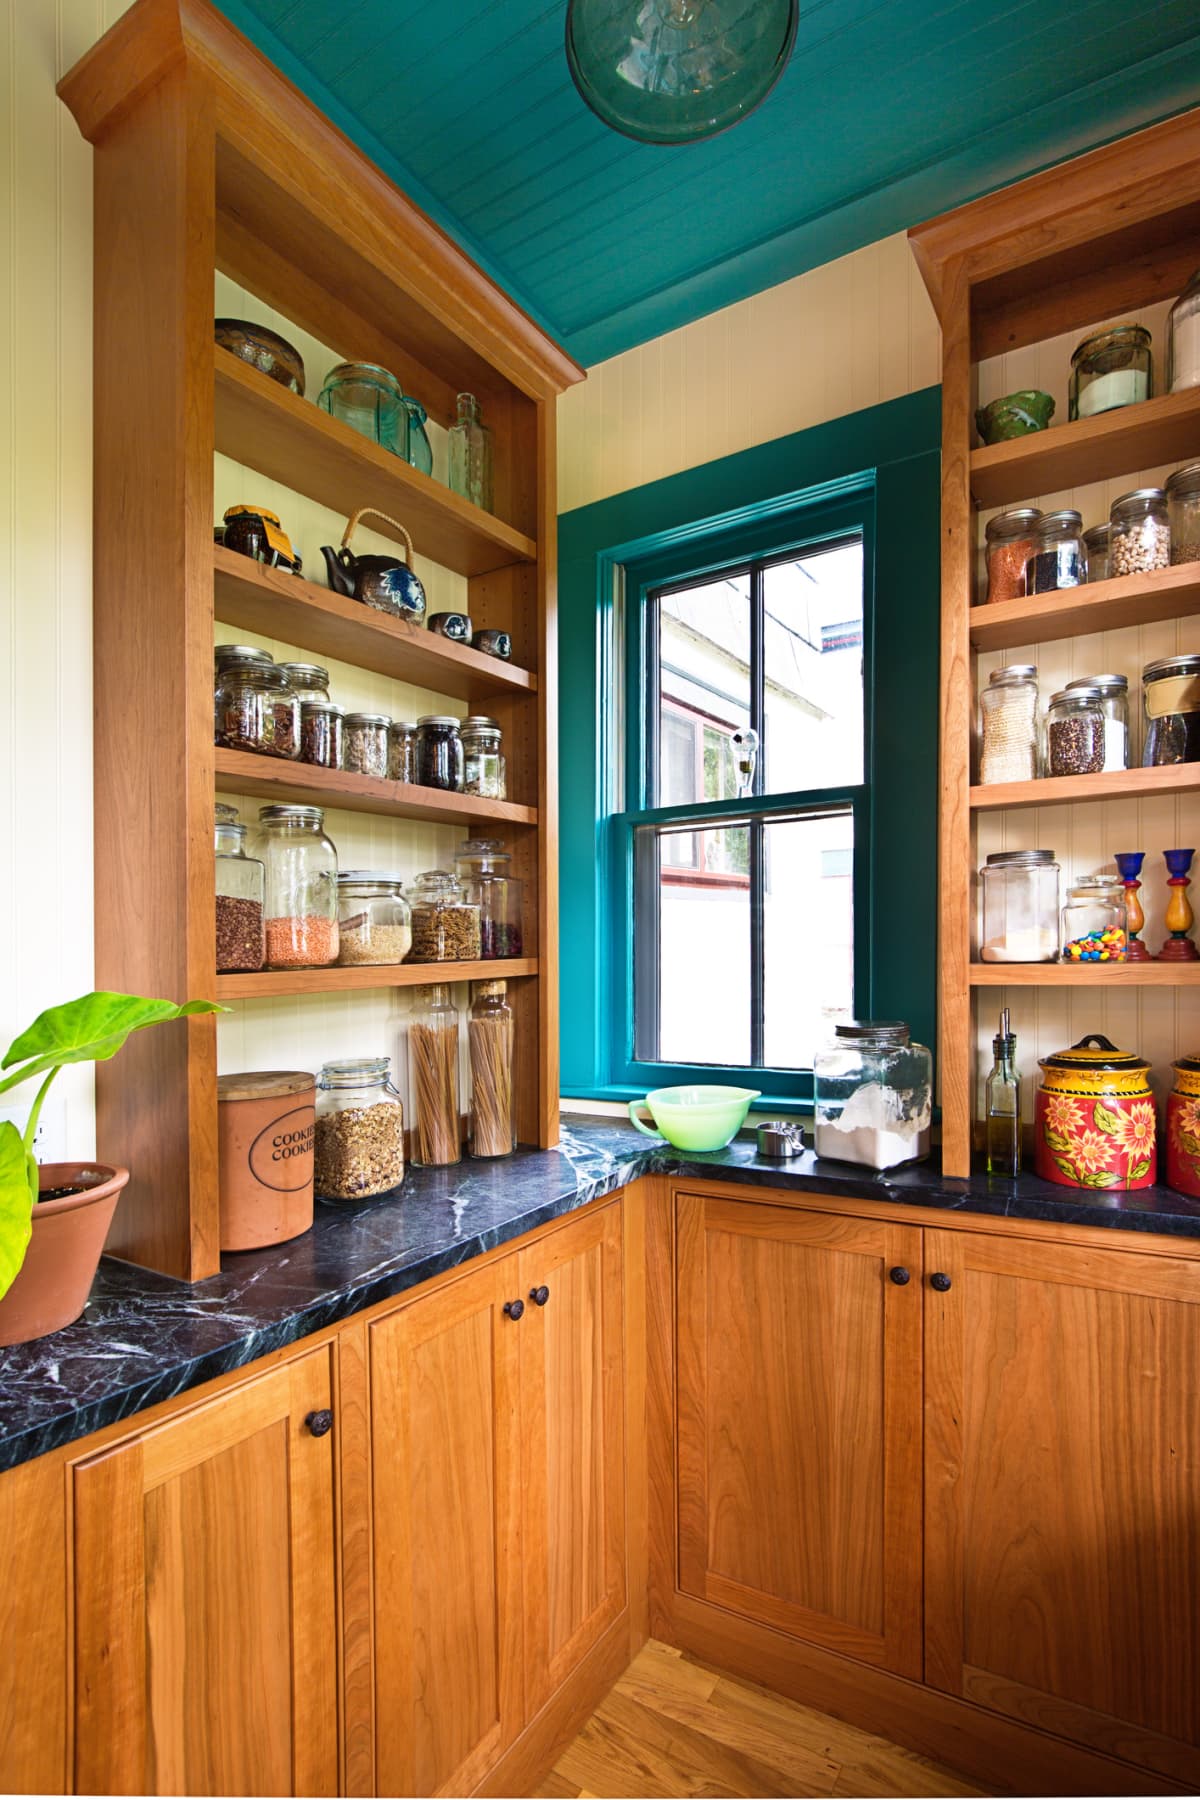 A contemporary classic kitchen renovation remodeling featuring a pantry storage shelf and maple cabinet.